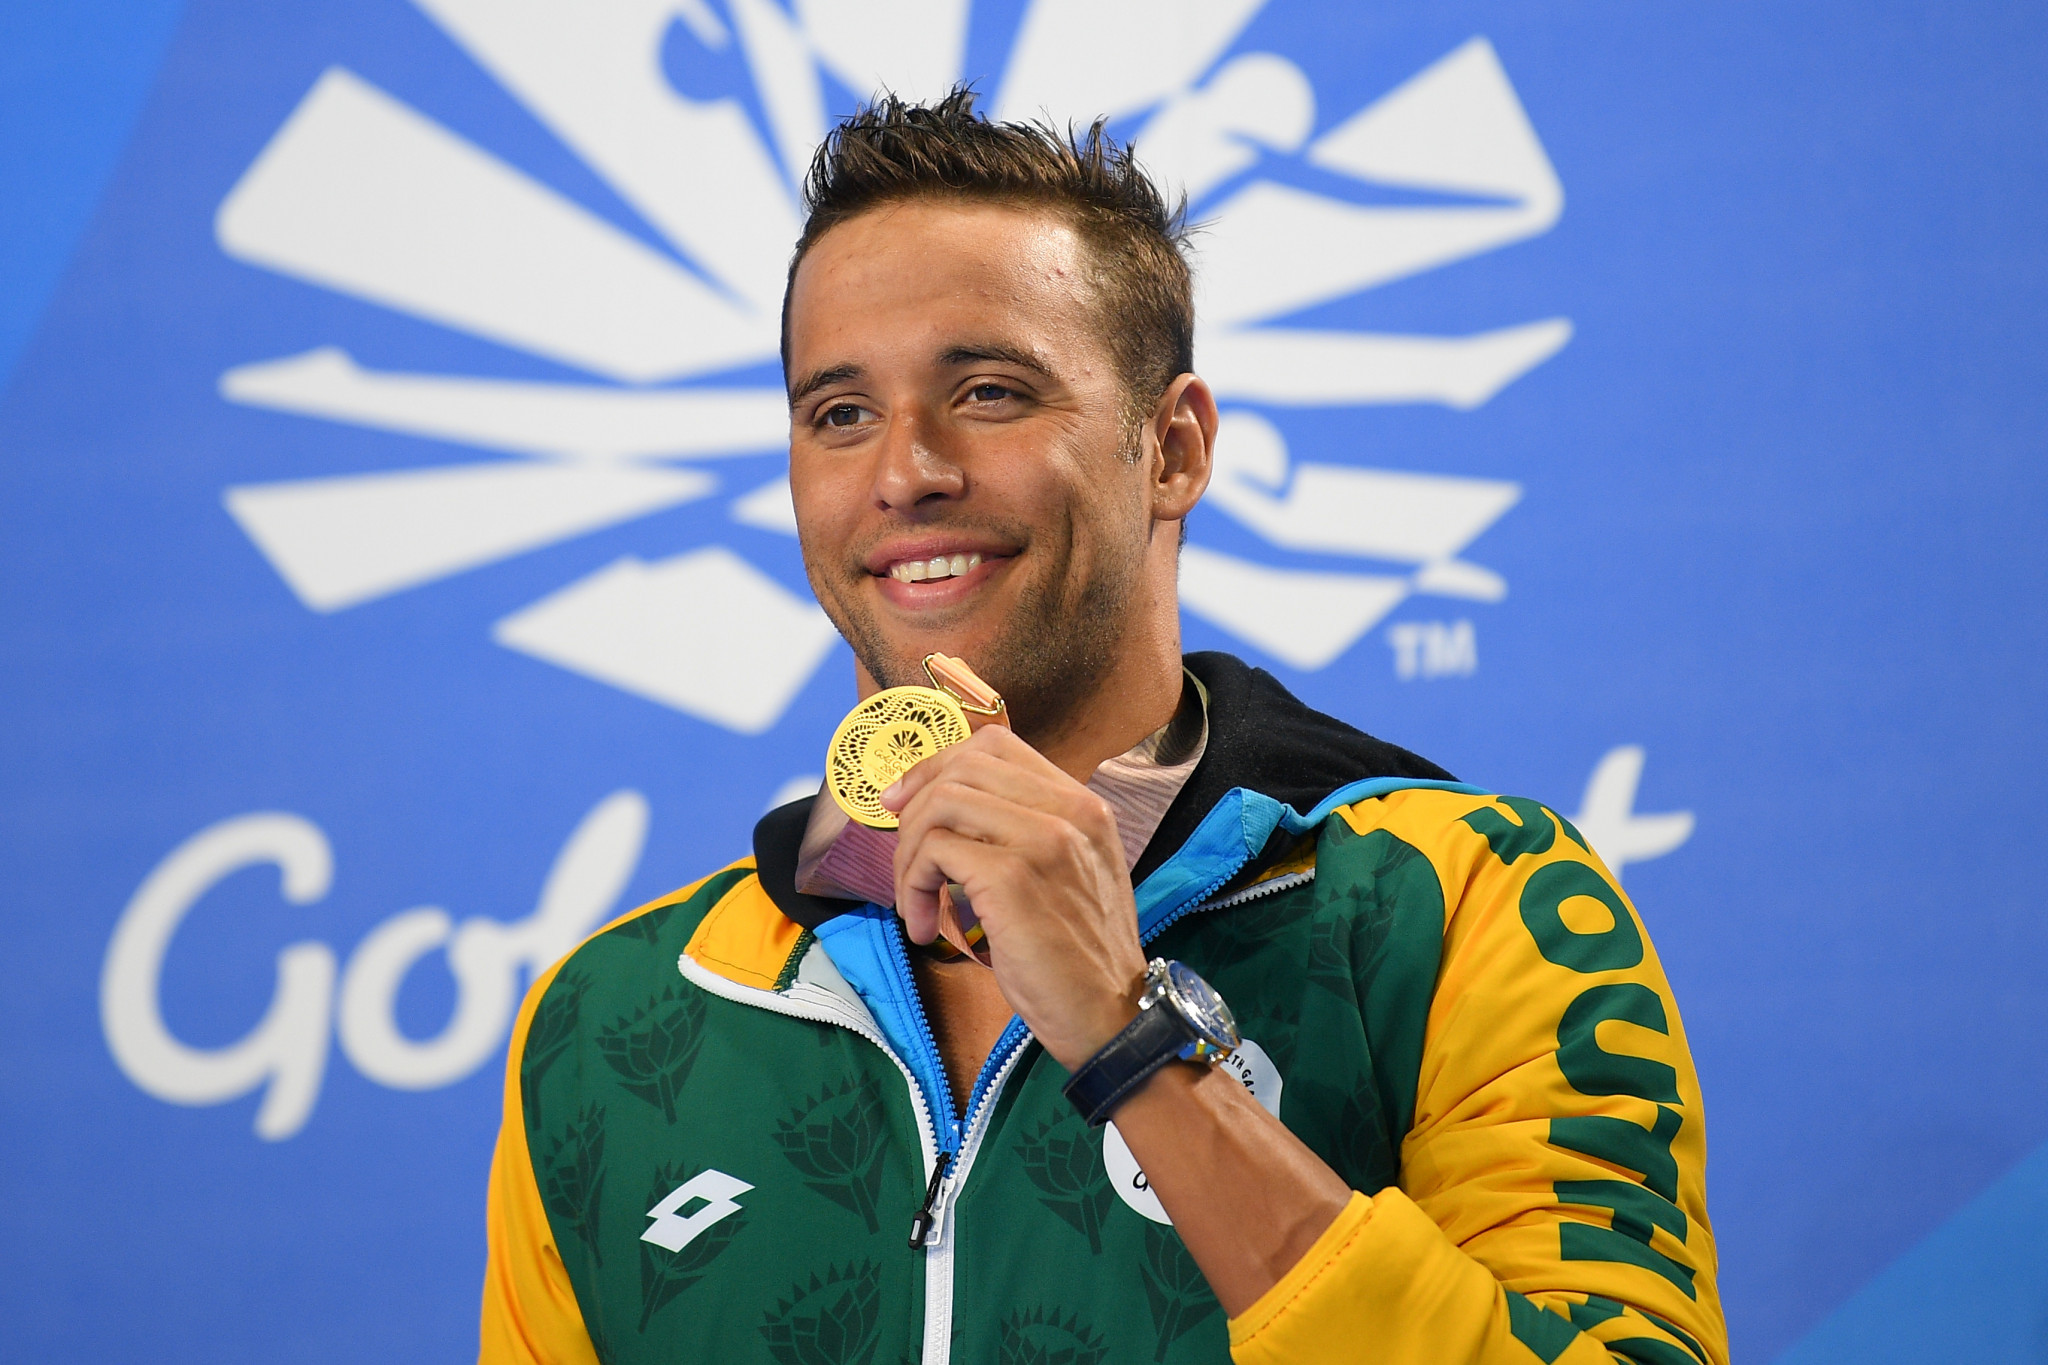 Chad le Clos added another major medal to his expansive collection with gold in the men's 100m butterfly ©Getty Images